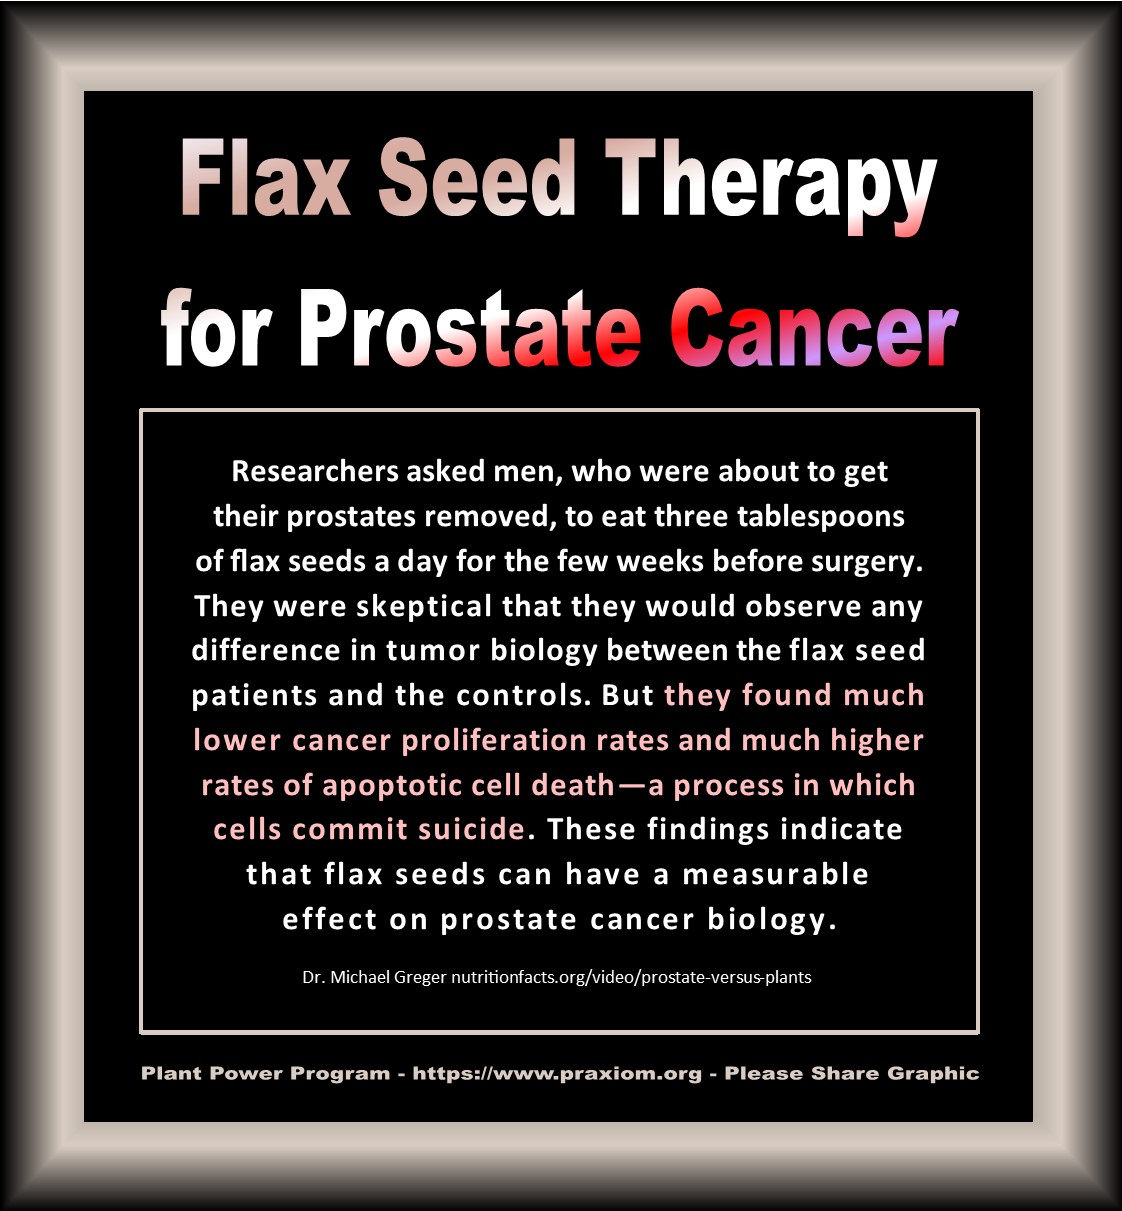 Flax Seeds and Prostate Cancer - Dr. Michael Greger 